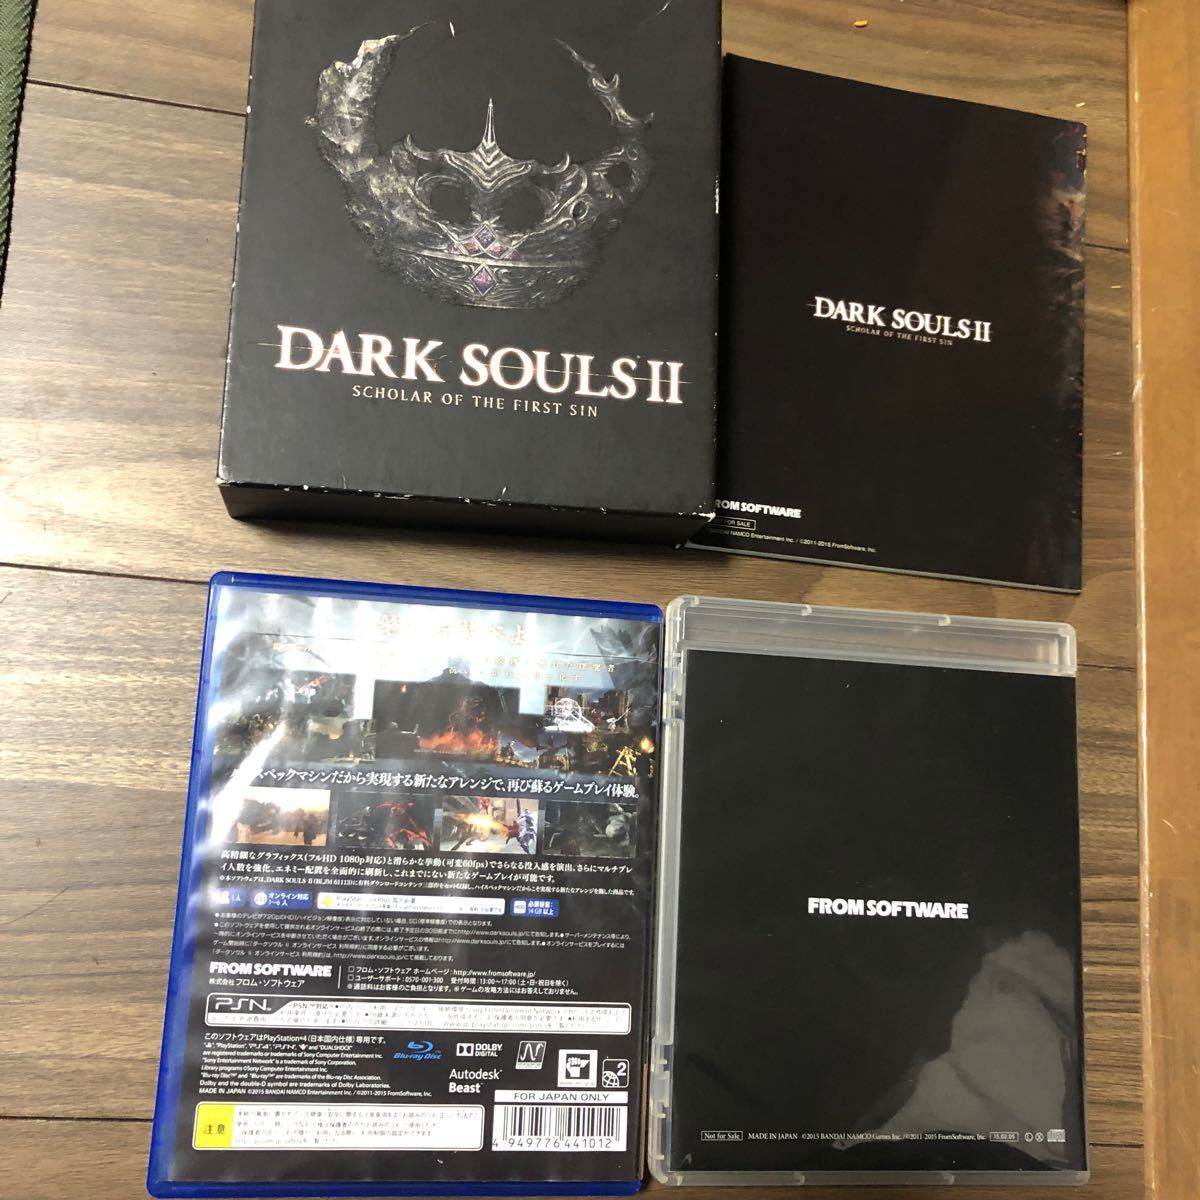 PS4 ダークソウル2 DARK SOULSII SCHOLAR OF THE FIRST SIN 数量限定版 中古ソフト